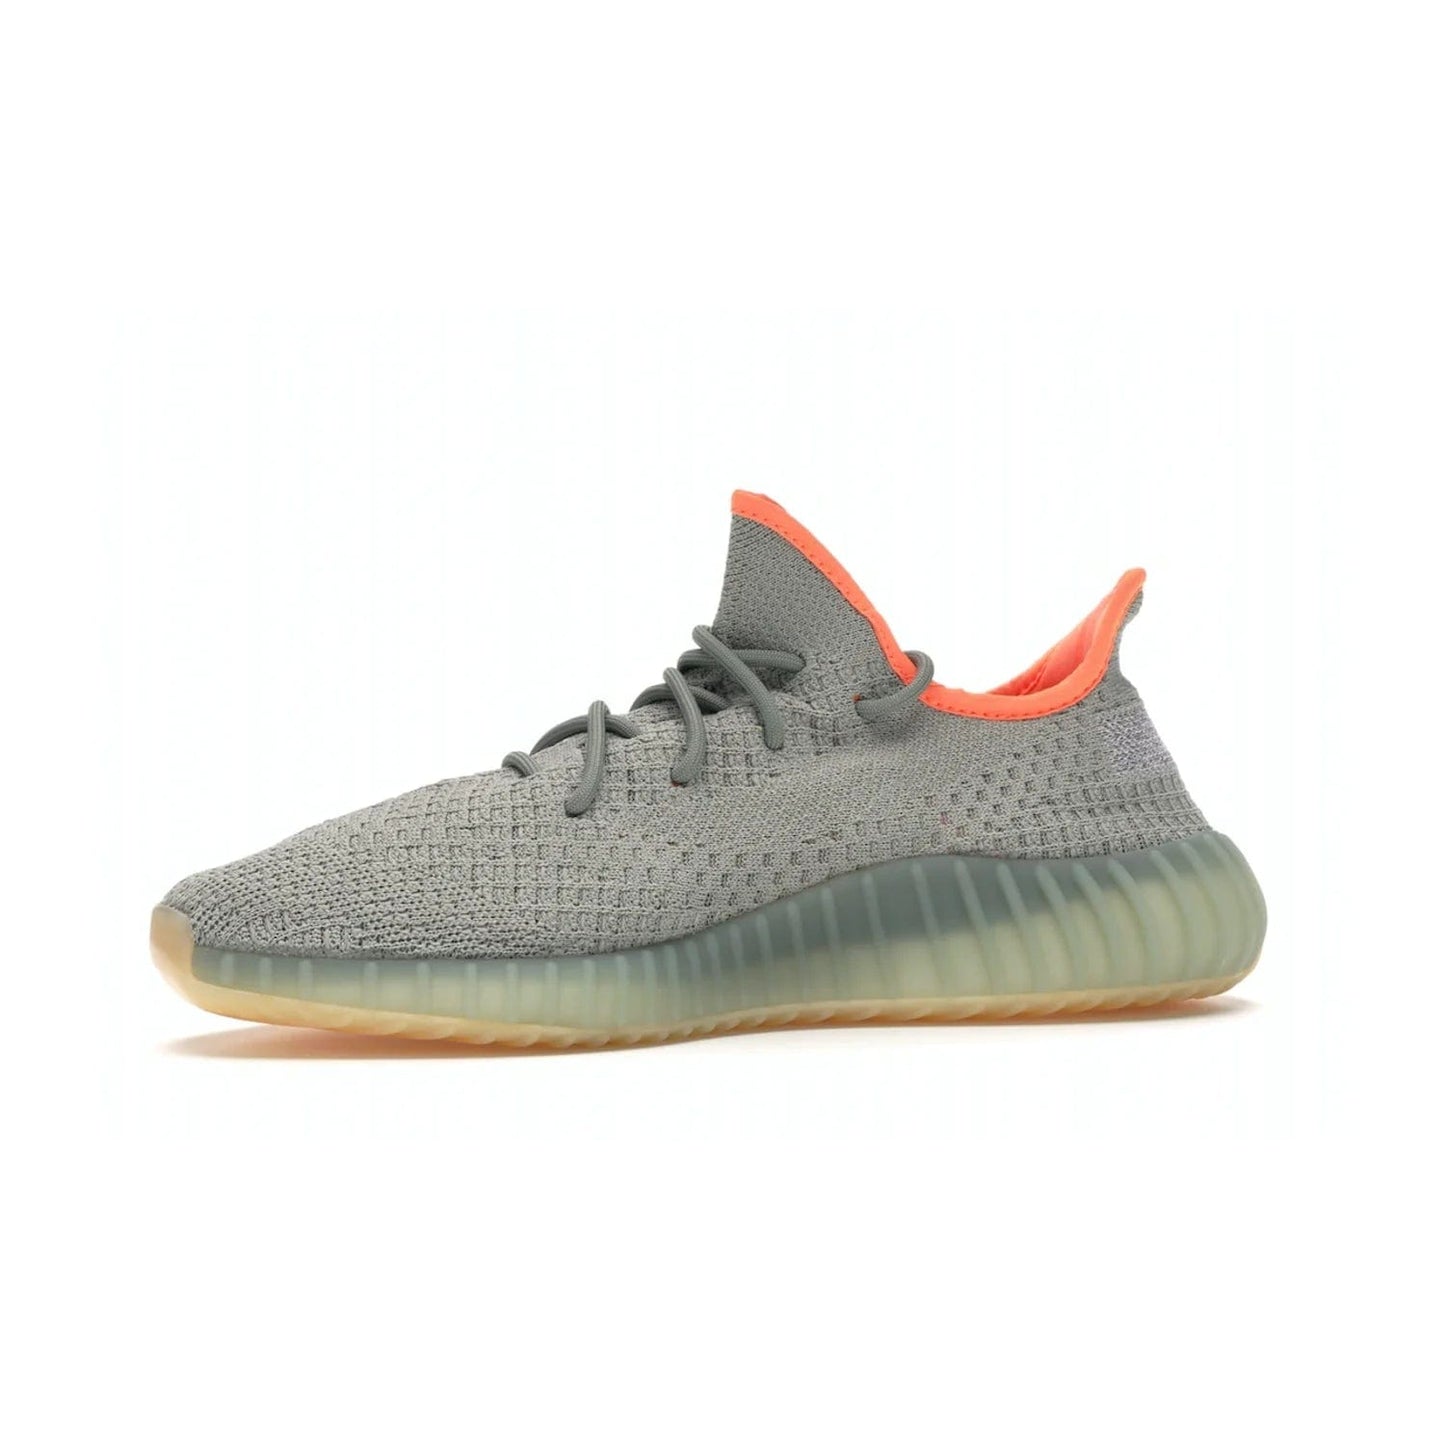 adidas Yeezy Boost 350 V2 Desert Sage - Image 17 - Only at www.BallersClubKickz.com - Upgrade your style with the adidas Yeezy Boost 350 V2 Desert Sage. This 350V2 features a Desert Sage primeknit upper with tonal side stripe, and an orange-highlighted translucent Boost cushioning sole. Stay on-trend in effortless style.